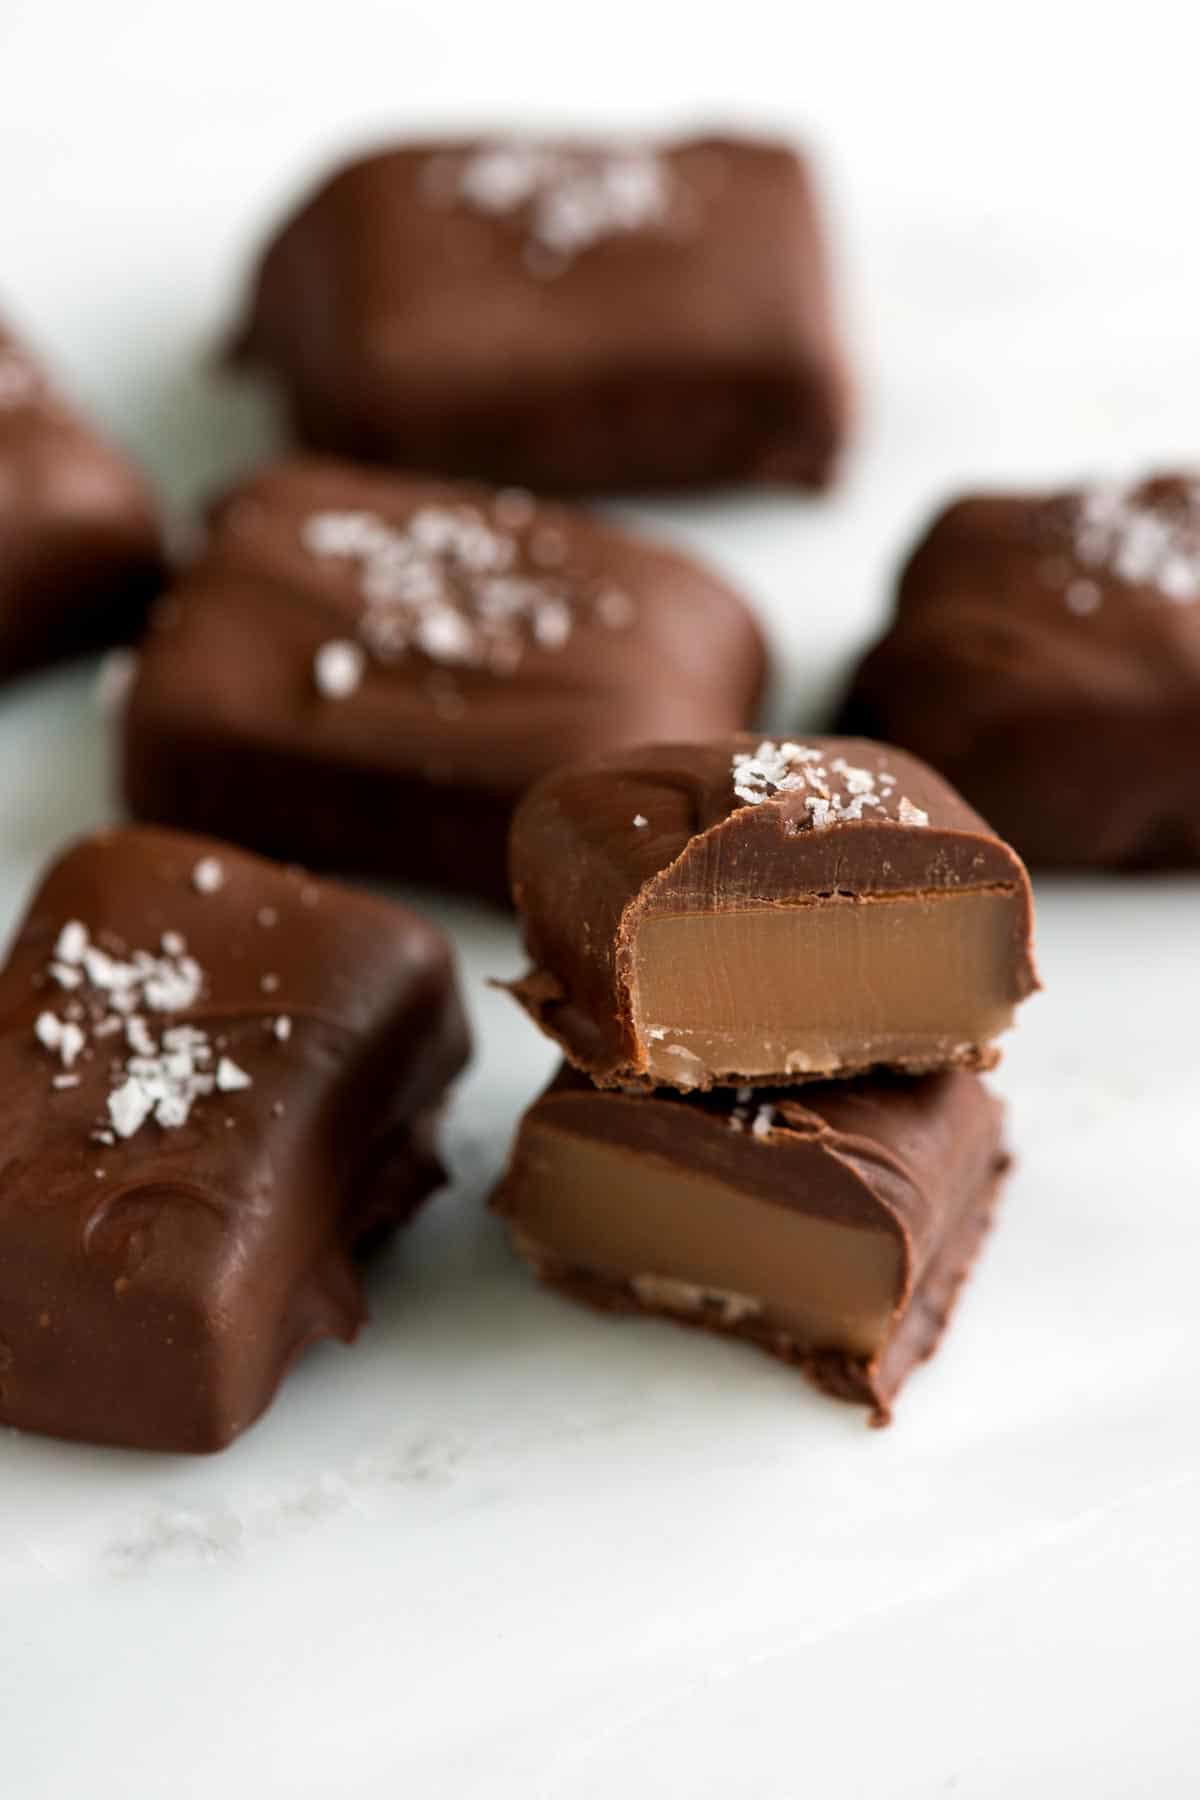 Salted Chocolate Covered Caramels Recipe with Video